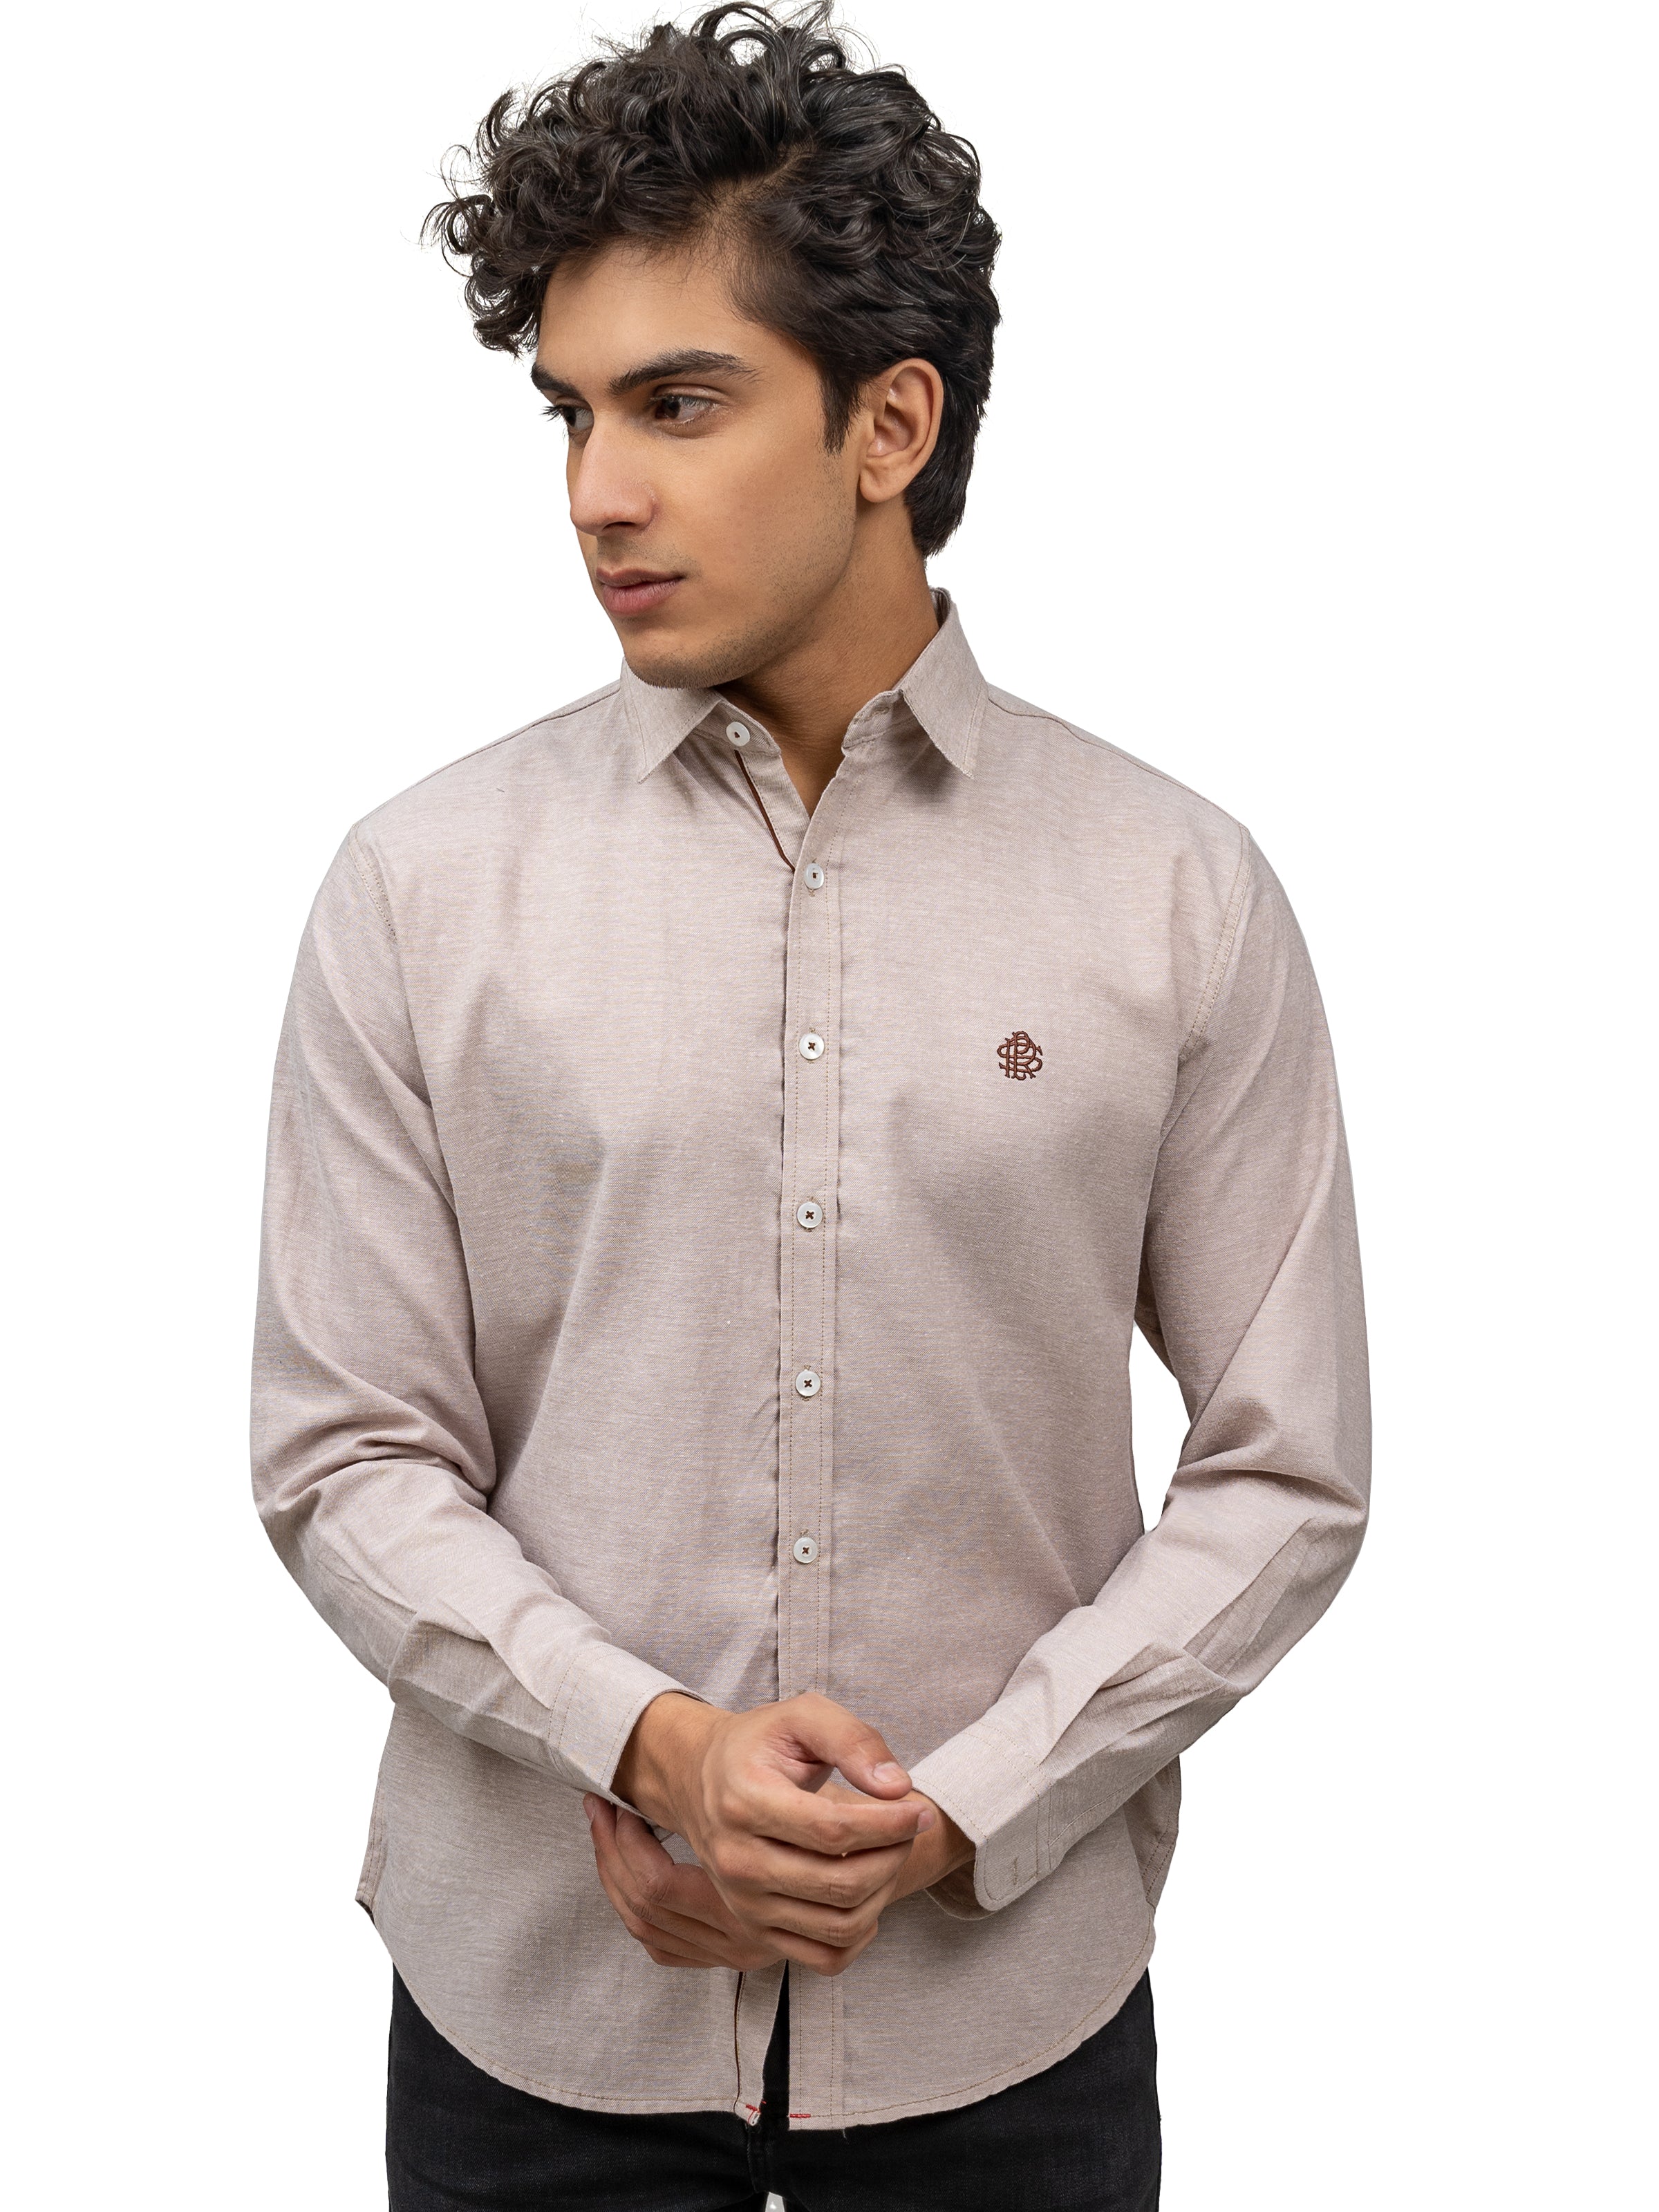 CASUAL SHIRT HALF SLEEVES SMART FIT LIGHT BROWN